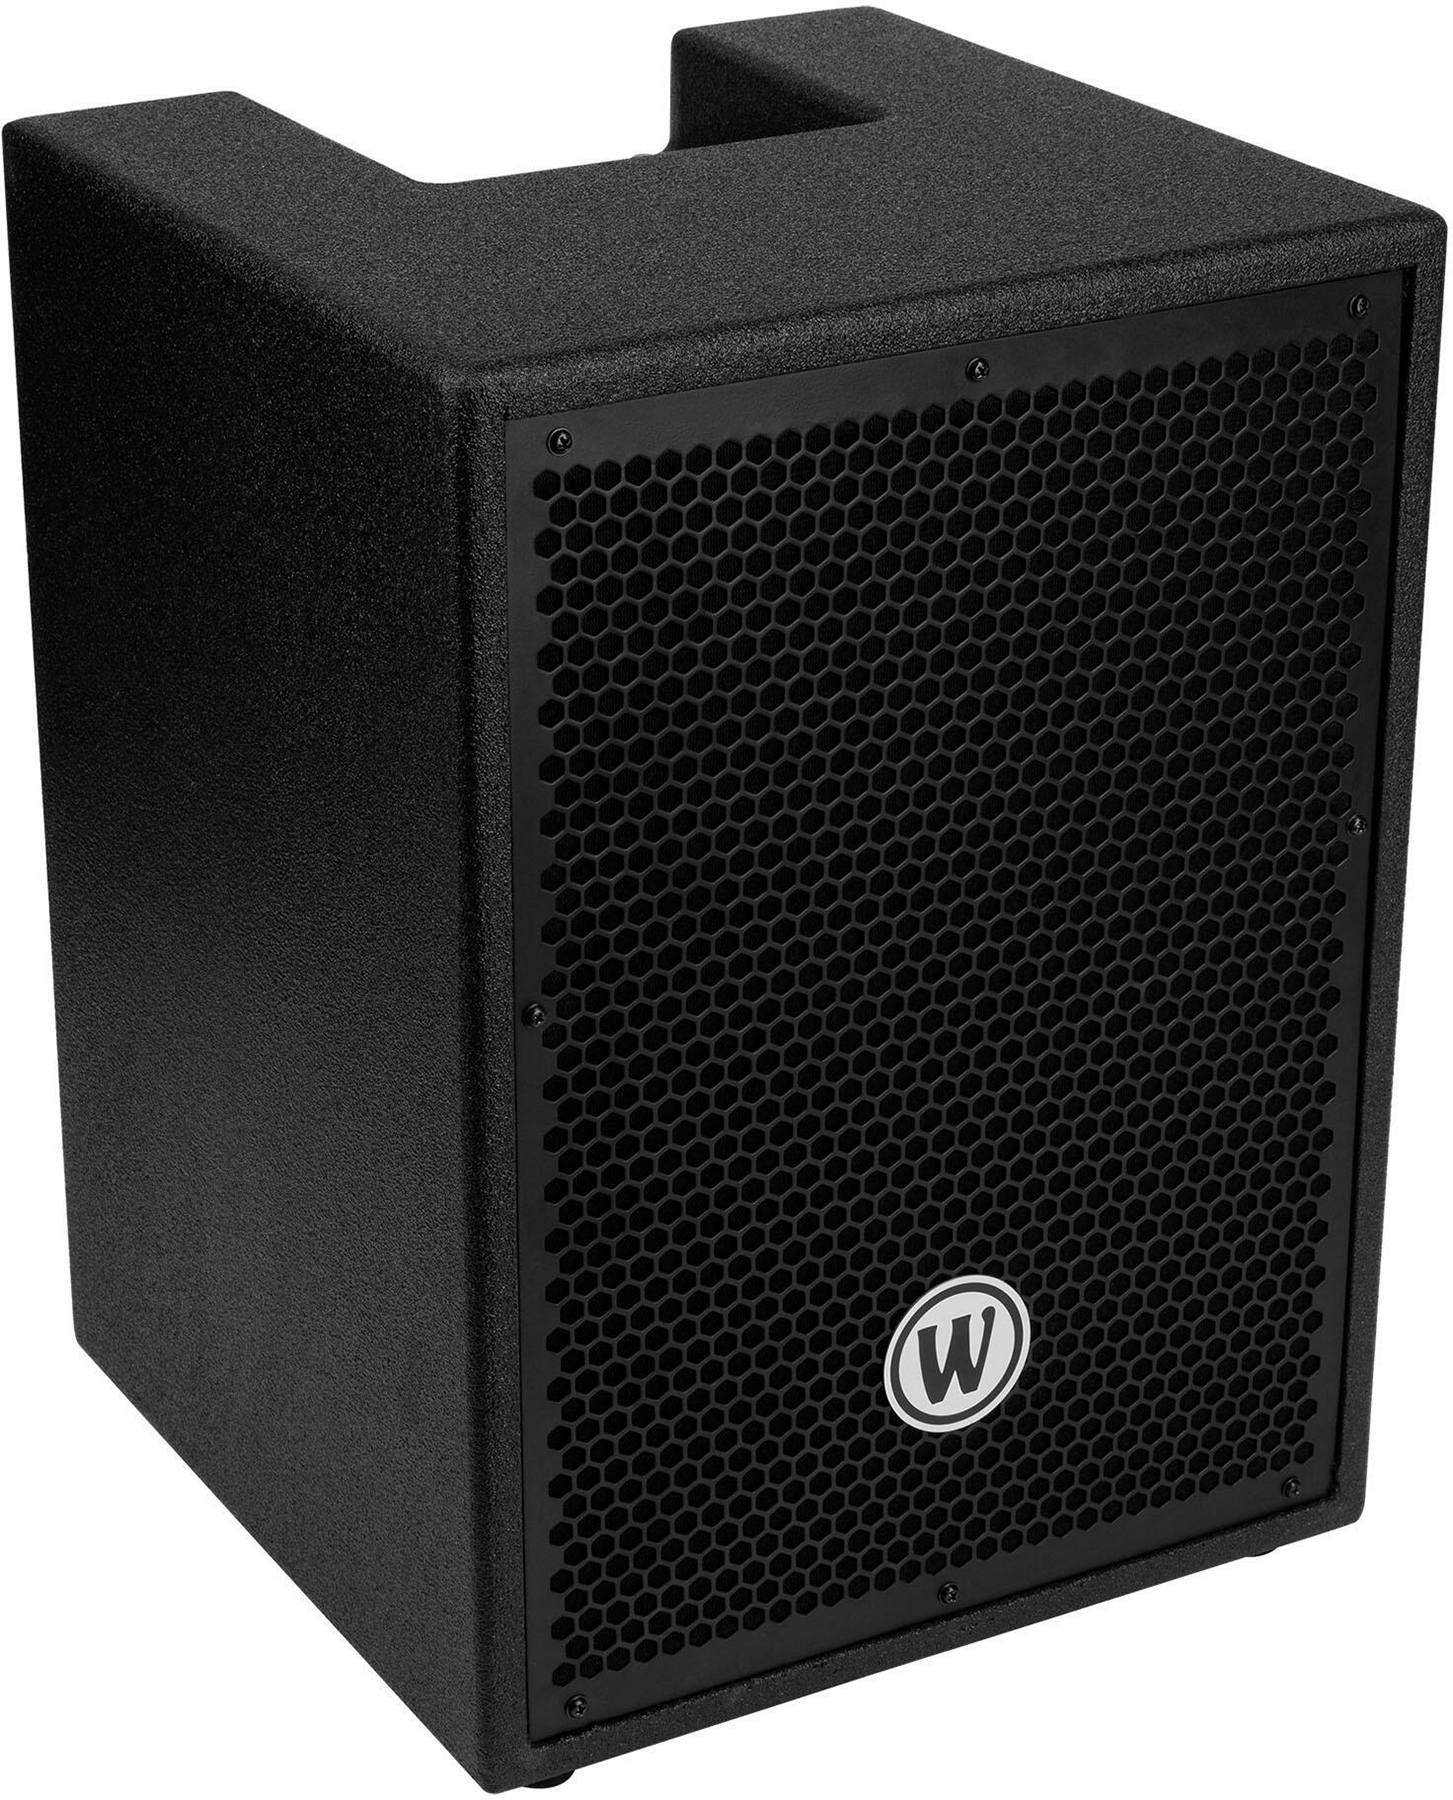 Warwick Gnome Pro Cab 12/4 Bass Cab 1x12 300w 4-ohms - Speakerkast voor bas - Main picture